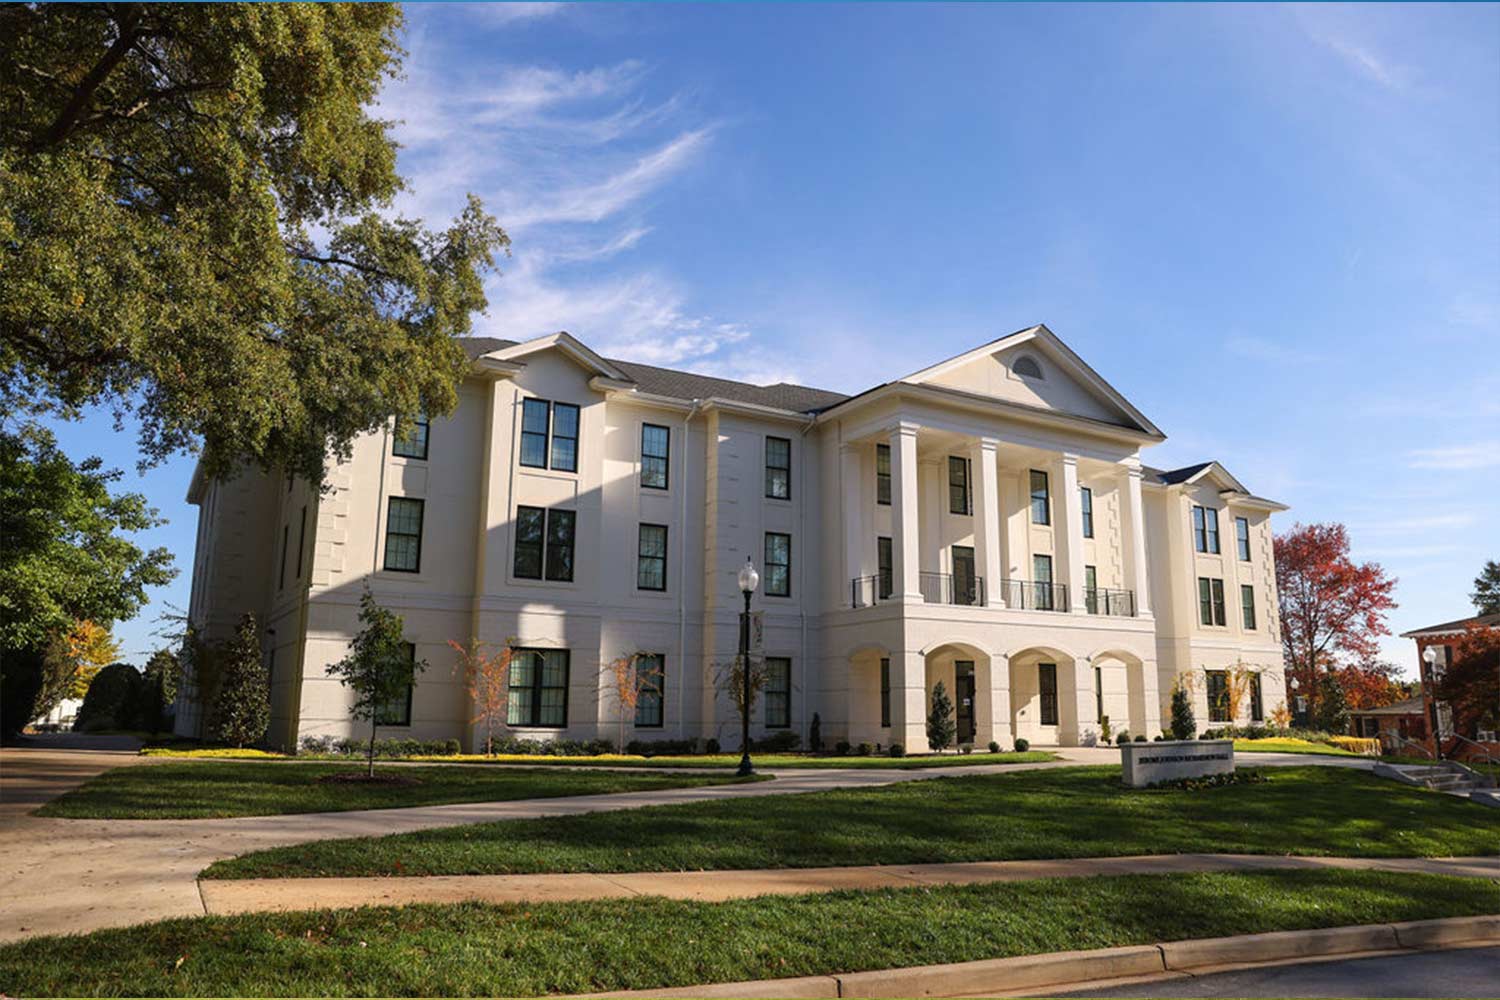 Wofford Residence Hall